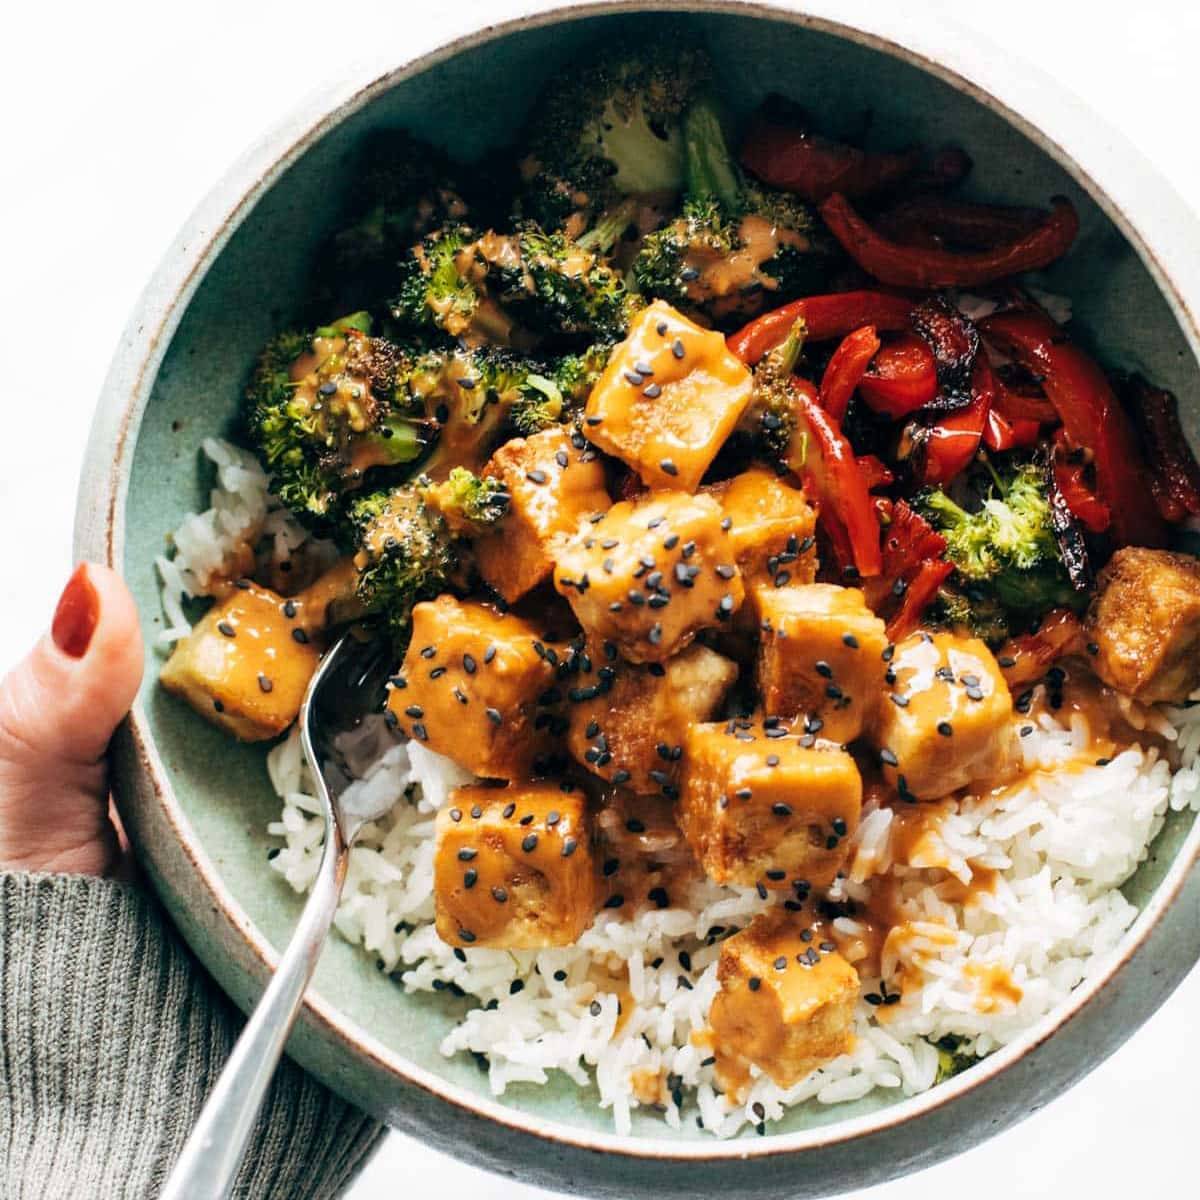 Serve in a bowl with a fork over rice topped with broccoli, tofu and pepper sauce.